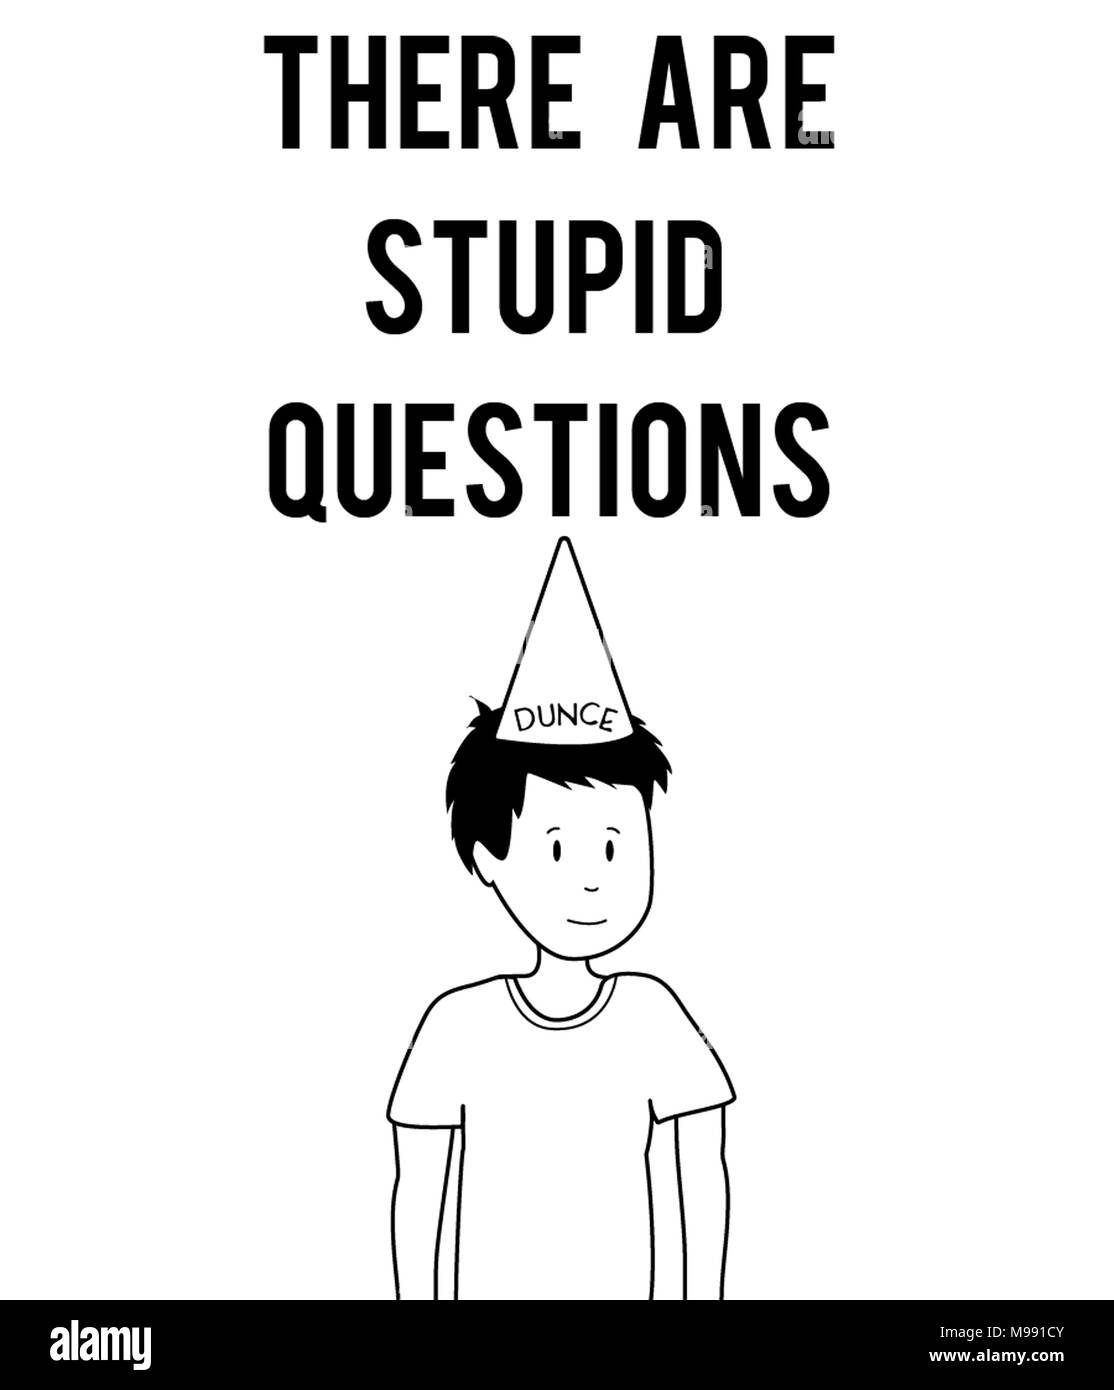 There are stupid questions Stock Photo